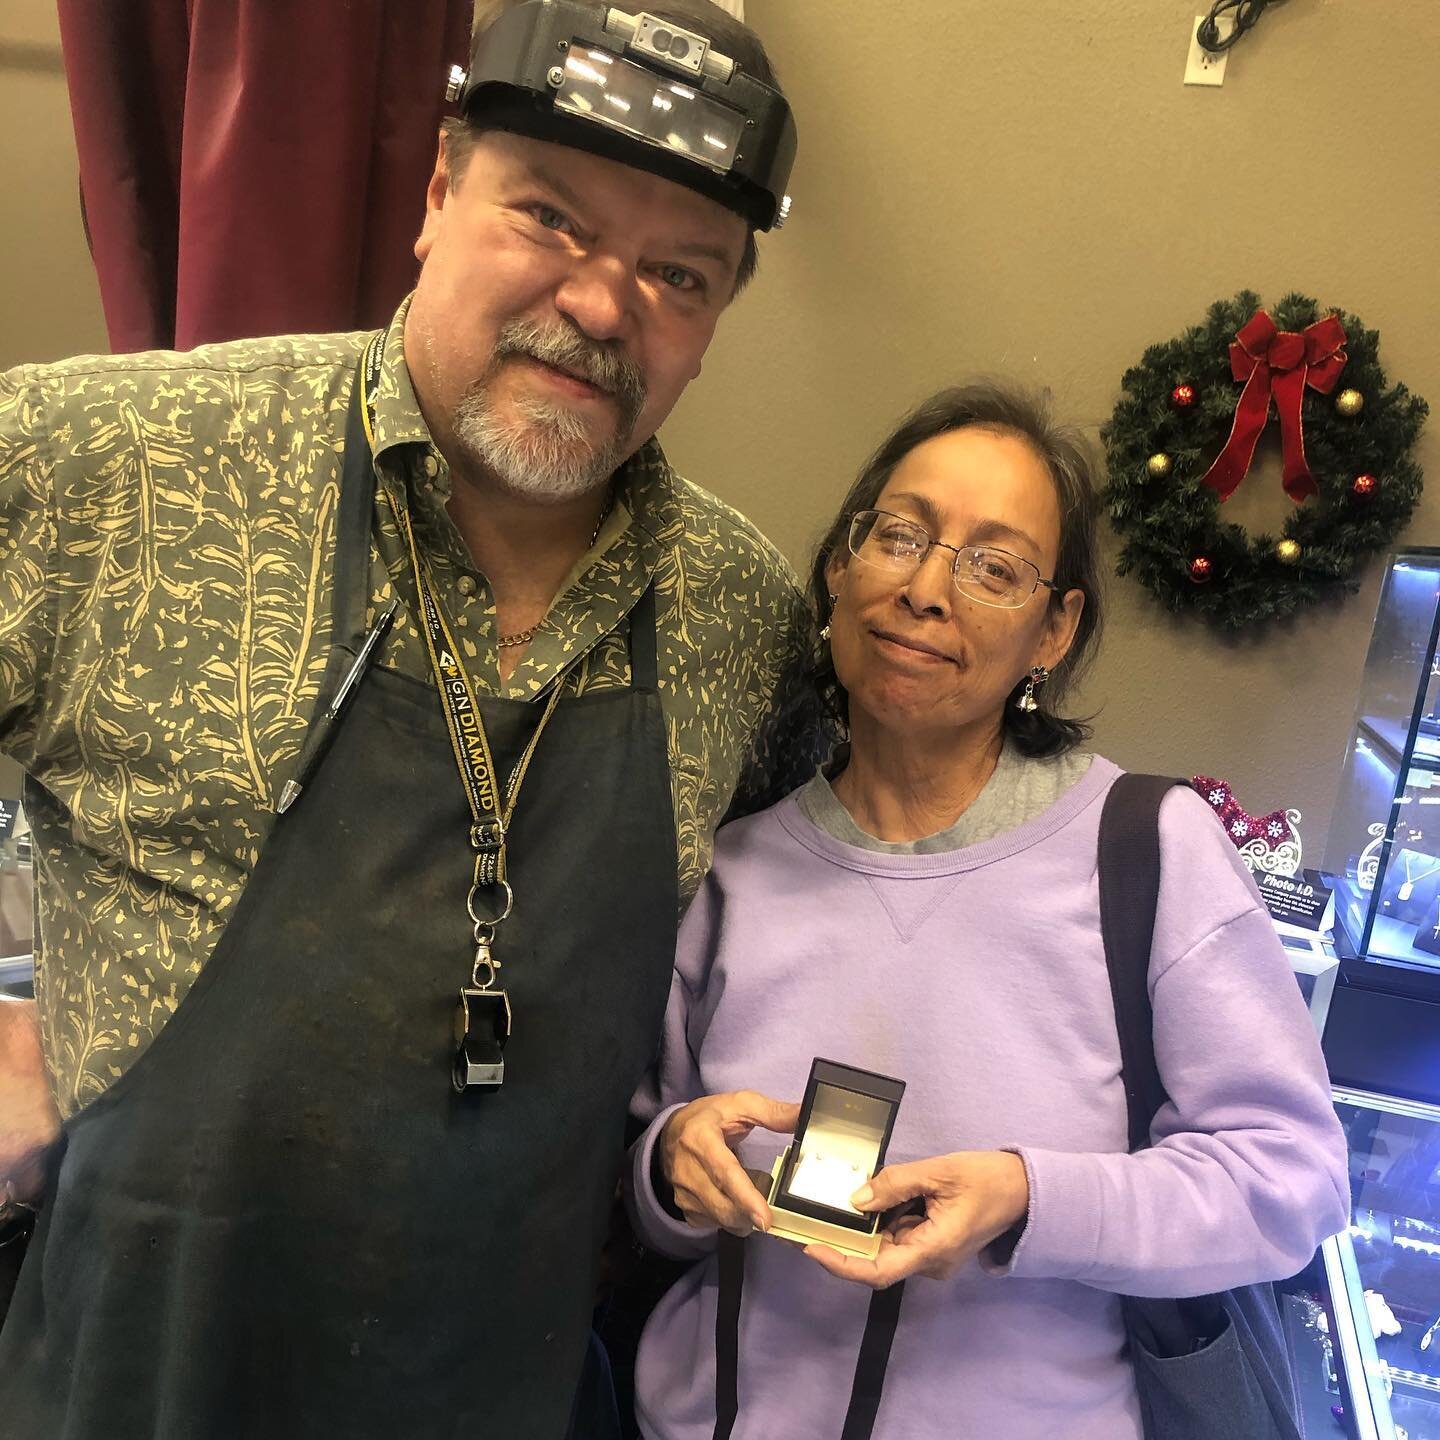 Our happy customer Michaela came and picked up her diamond studs! Stay tuned our next giveaway! #diamondstudearrings #winner #giveaway #jewelryrepair 💍💎✨